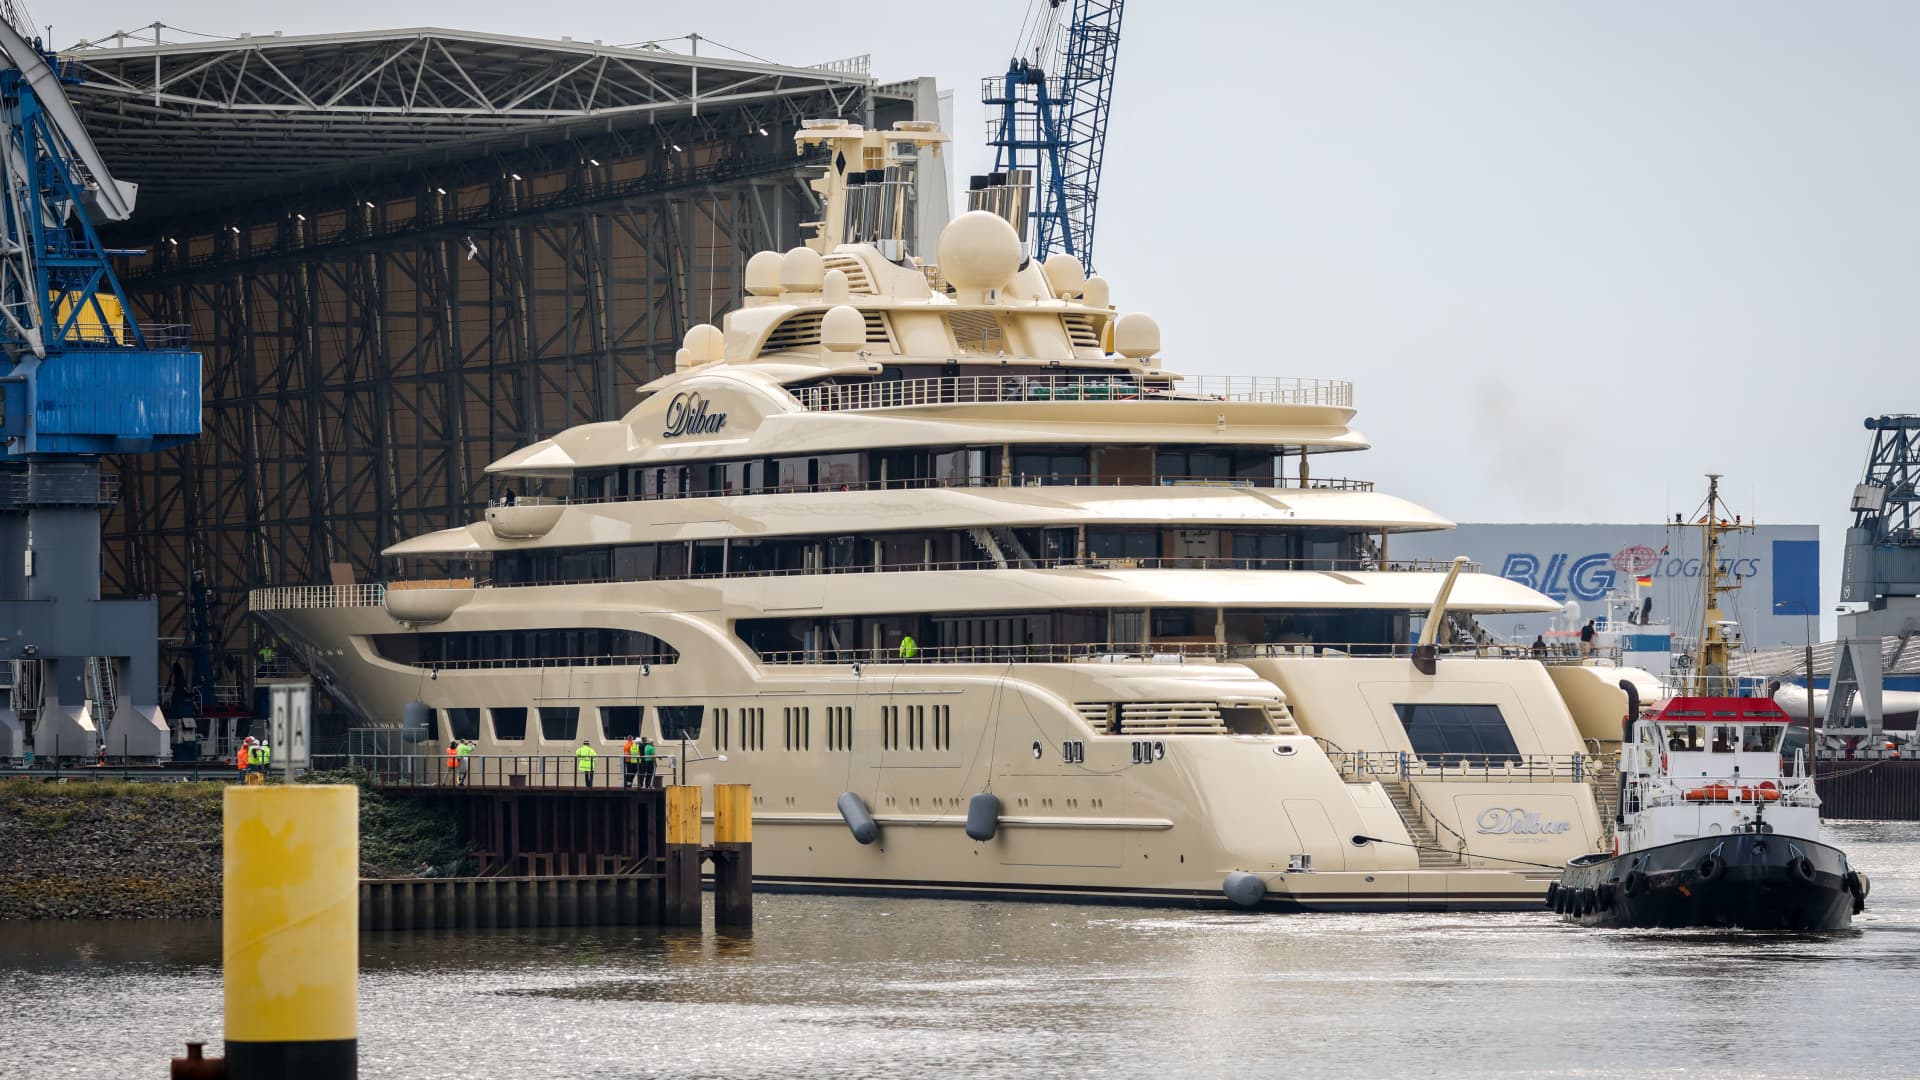 The super-yacht Dilbar is pulled into a covered floating dock of Luerssen shipyards on the Weser river at the harbour of Bremen on September 23, 2022. - The 156-meter-yacht had stayed since October 2021 for repairs in dry dock at a German shipbuilding company at Hamburg's harbour, northern Germany, and is considered the world's biggest by tonnage. It is owned the Russian billionaire Alisher Usmanov, 68, who has been among dozens of Russian oligarchs hit by punishing Western sanctions over Russian President Vladimir Putin's invasion of Ukraine. (Photo by FOCKE STRANGMANN / AFP) (Photo by FOCKE STRANGMANN/AFP via Getty Images)